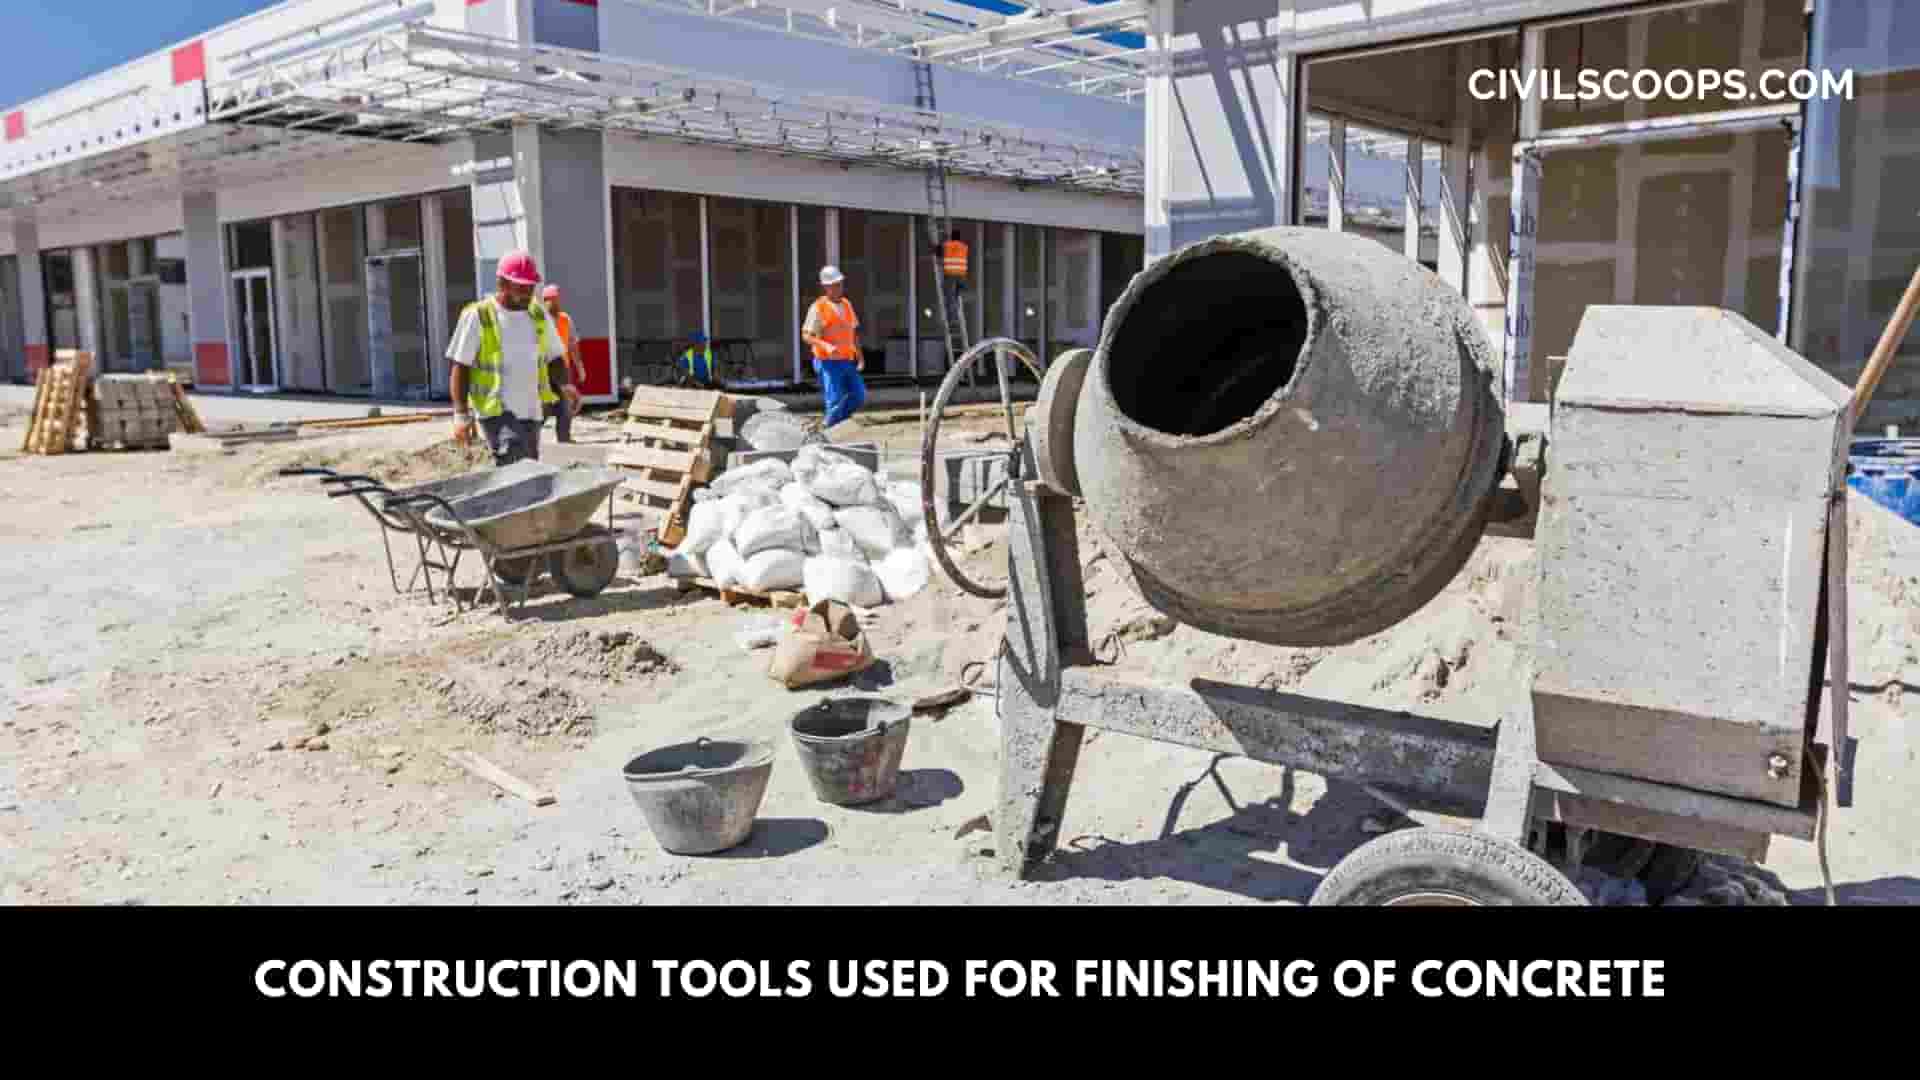 Construction Tools Used for Finishing of Concrete